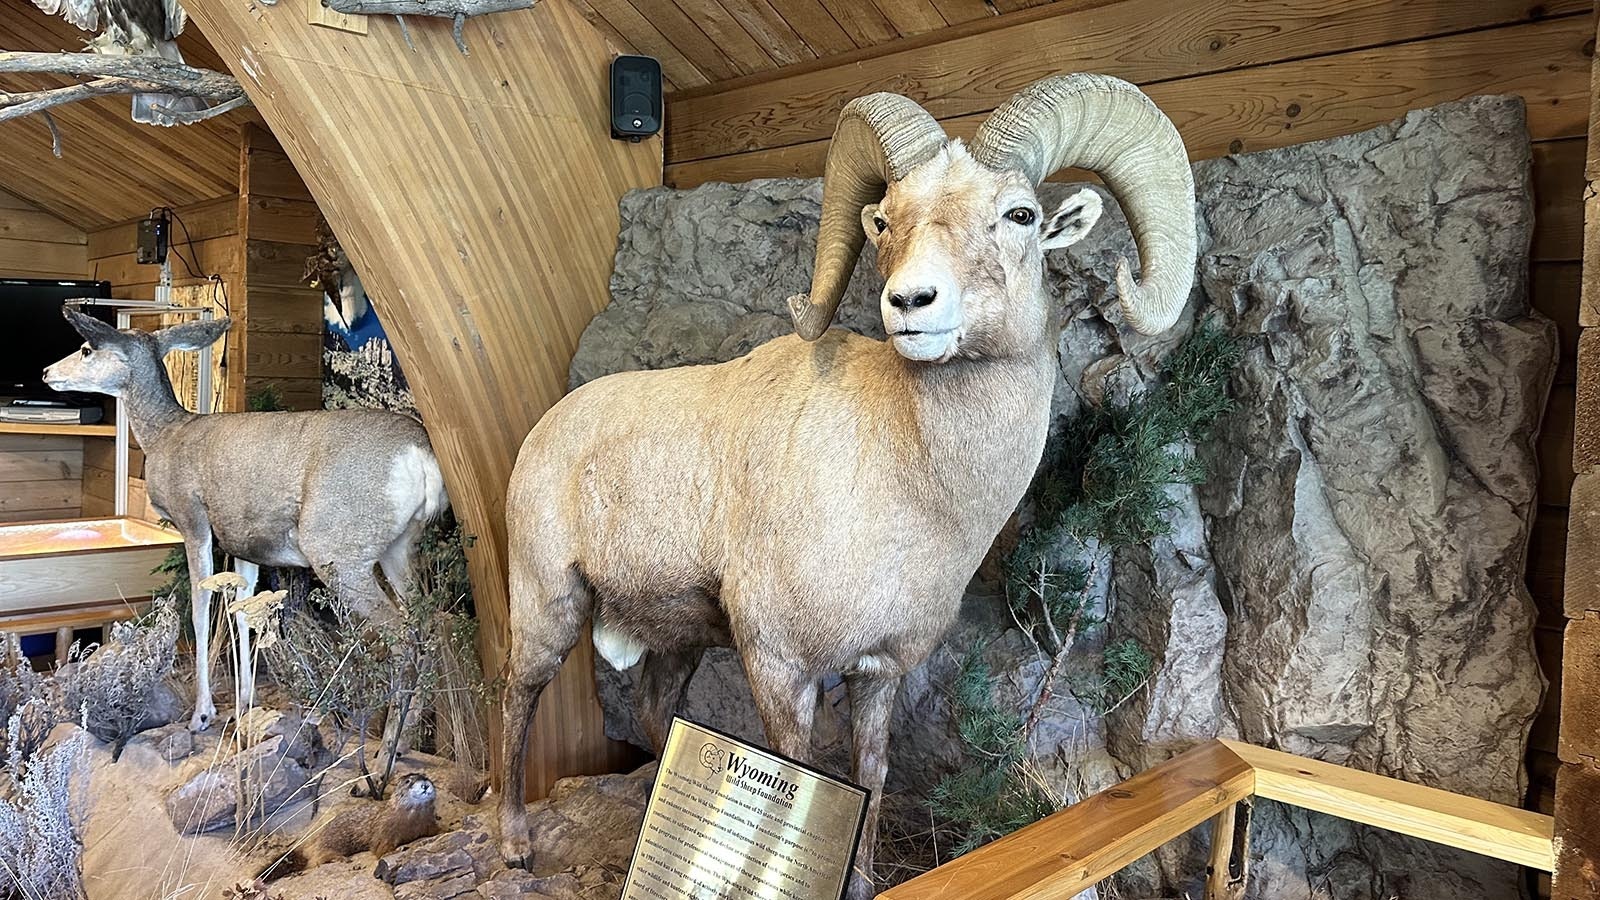 Bam-Bam was a Rocky Mountain bighorn sheep ram that lived in the Sinks Canyon area near Lander. After he died of natural causes in 2013, he was immortalized in this full-body taxidermy mount, on display at the Sinks Canyon State Park visitors center.